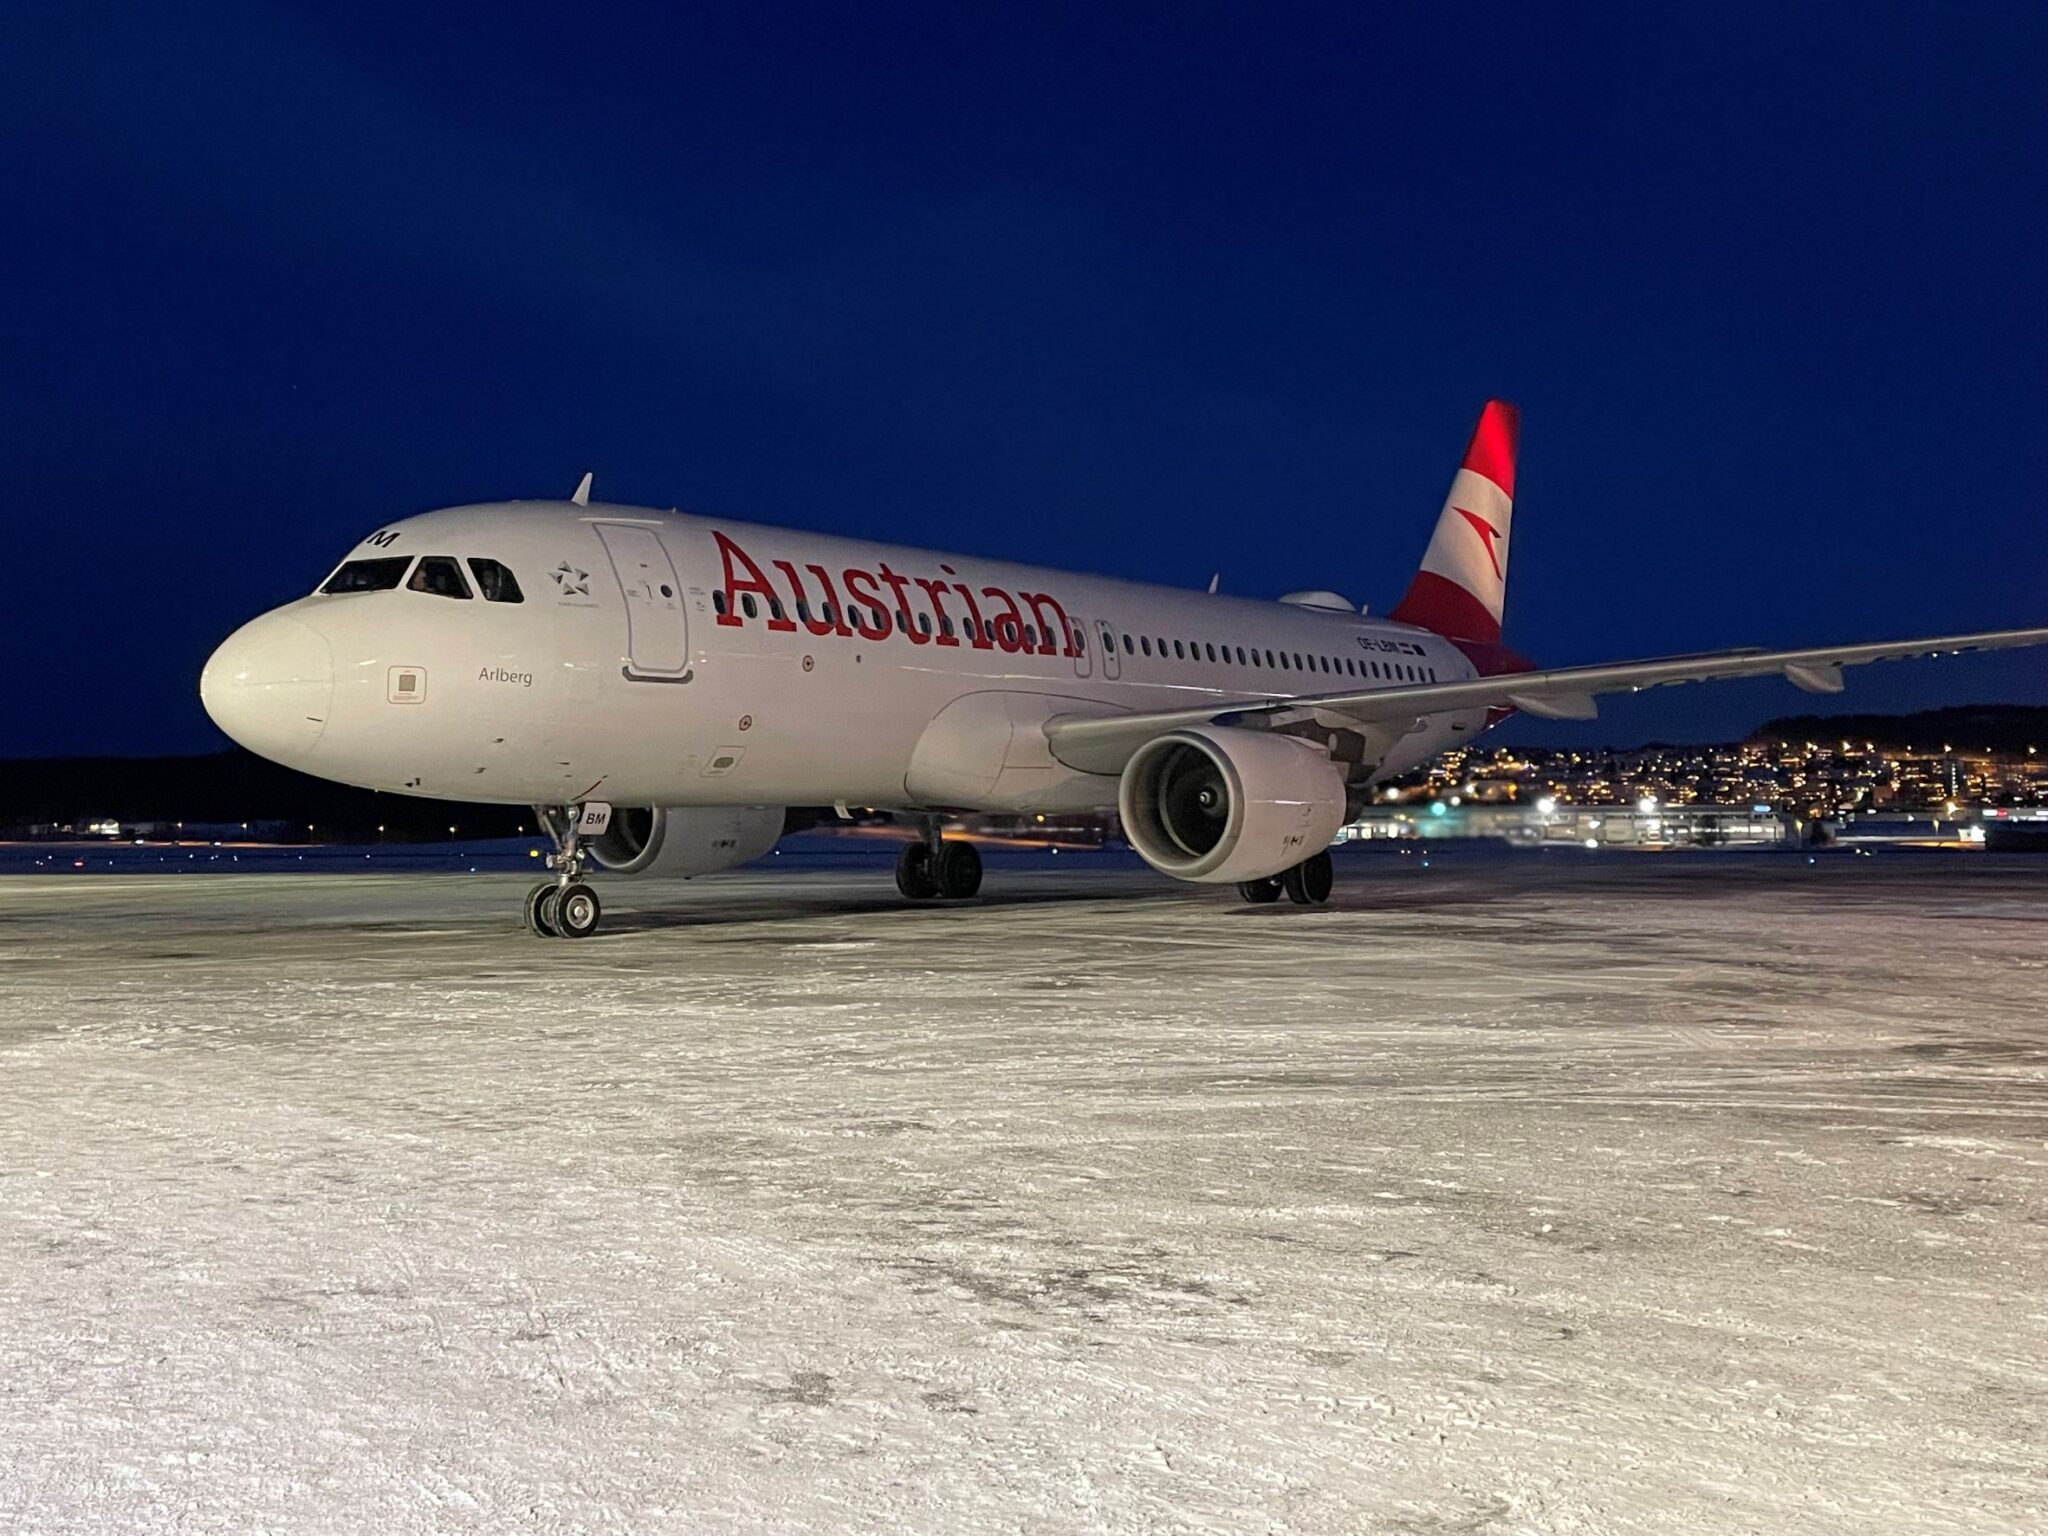 austrian-airlines-took-off-for-the-first-time-to-tromso